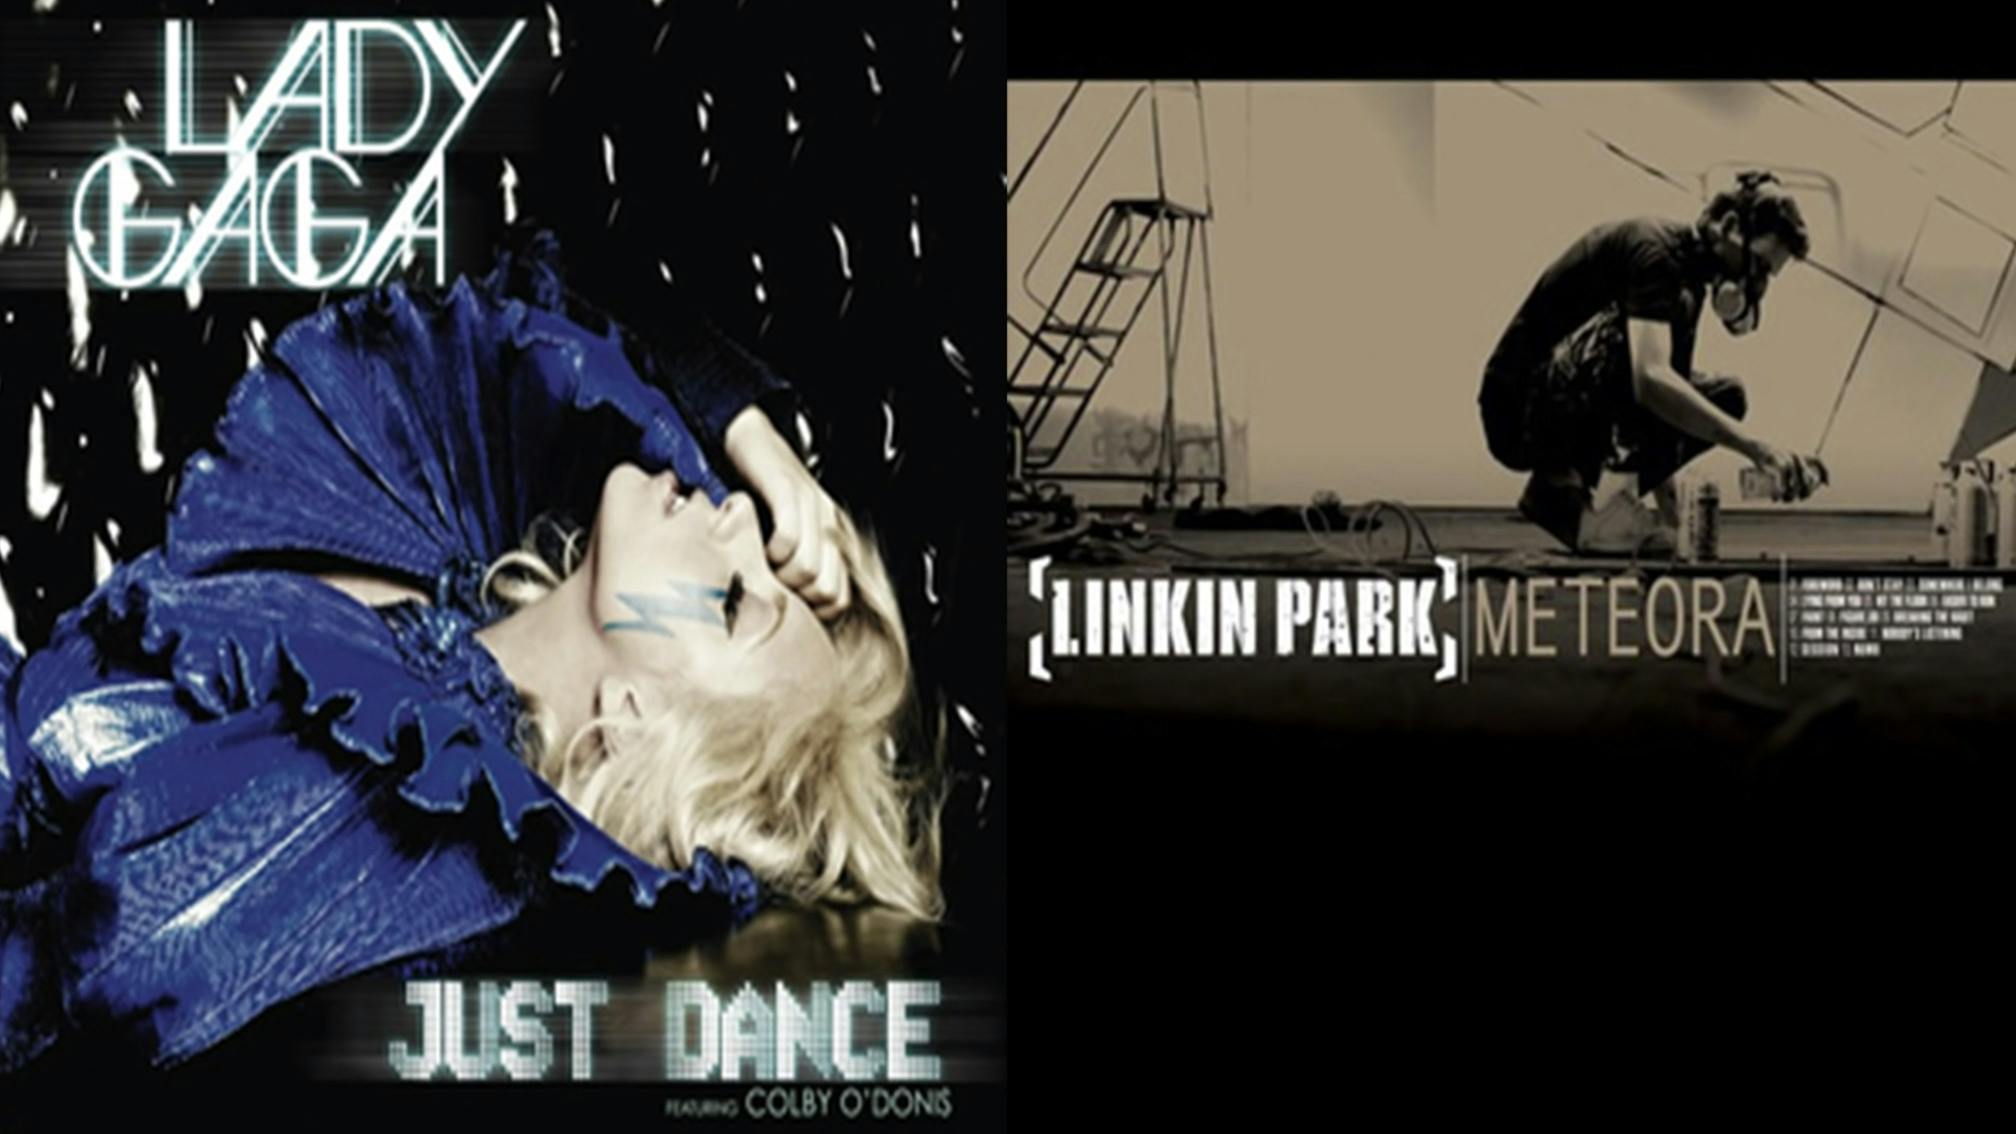 This Mash-Up Of Linkin Park And Lady Gaga Is A Ridiculously Good Time